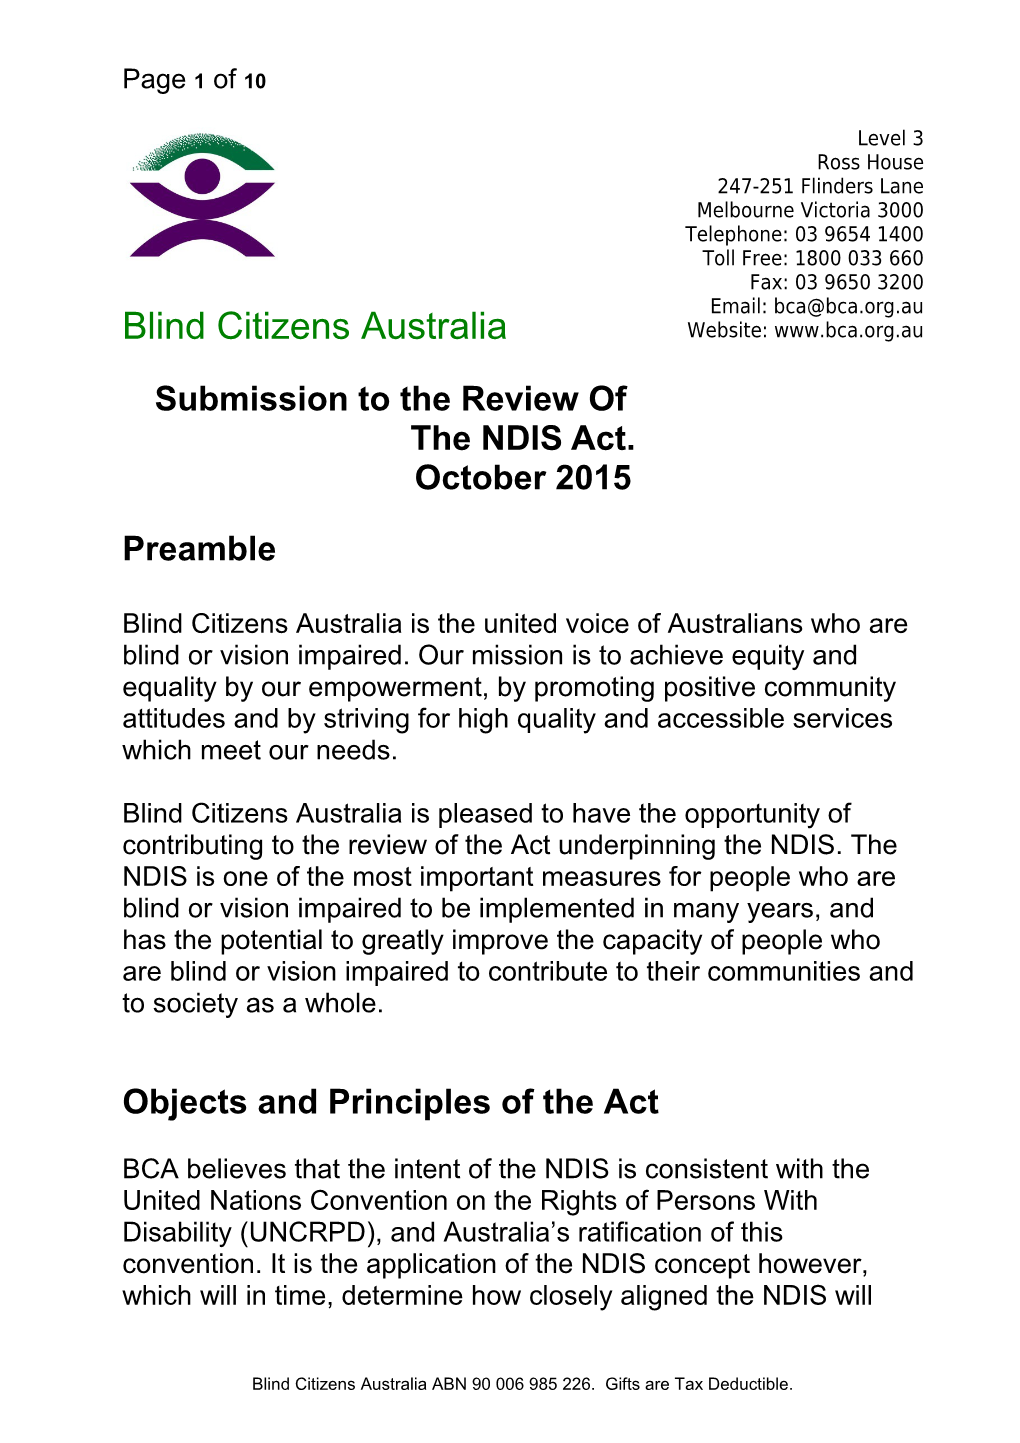 Submission to the Review of the NDIS Act